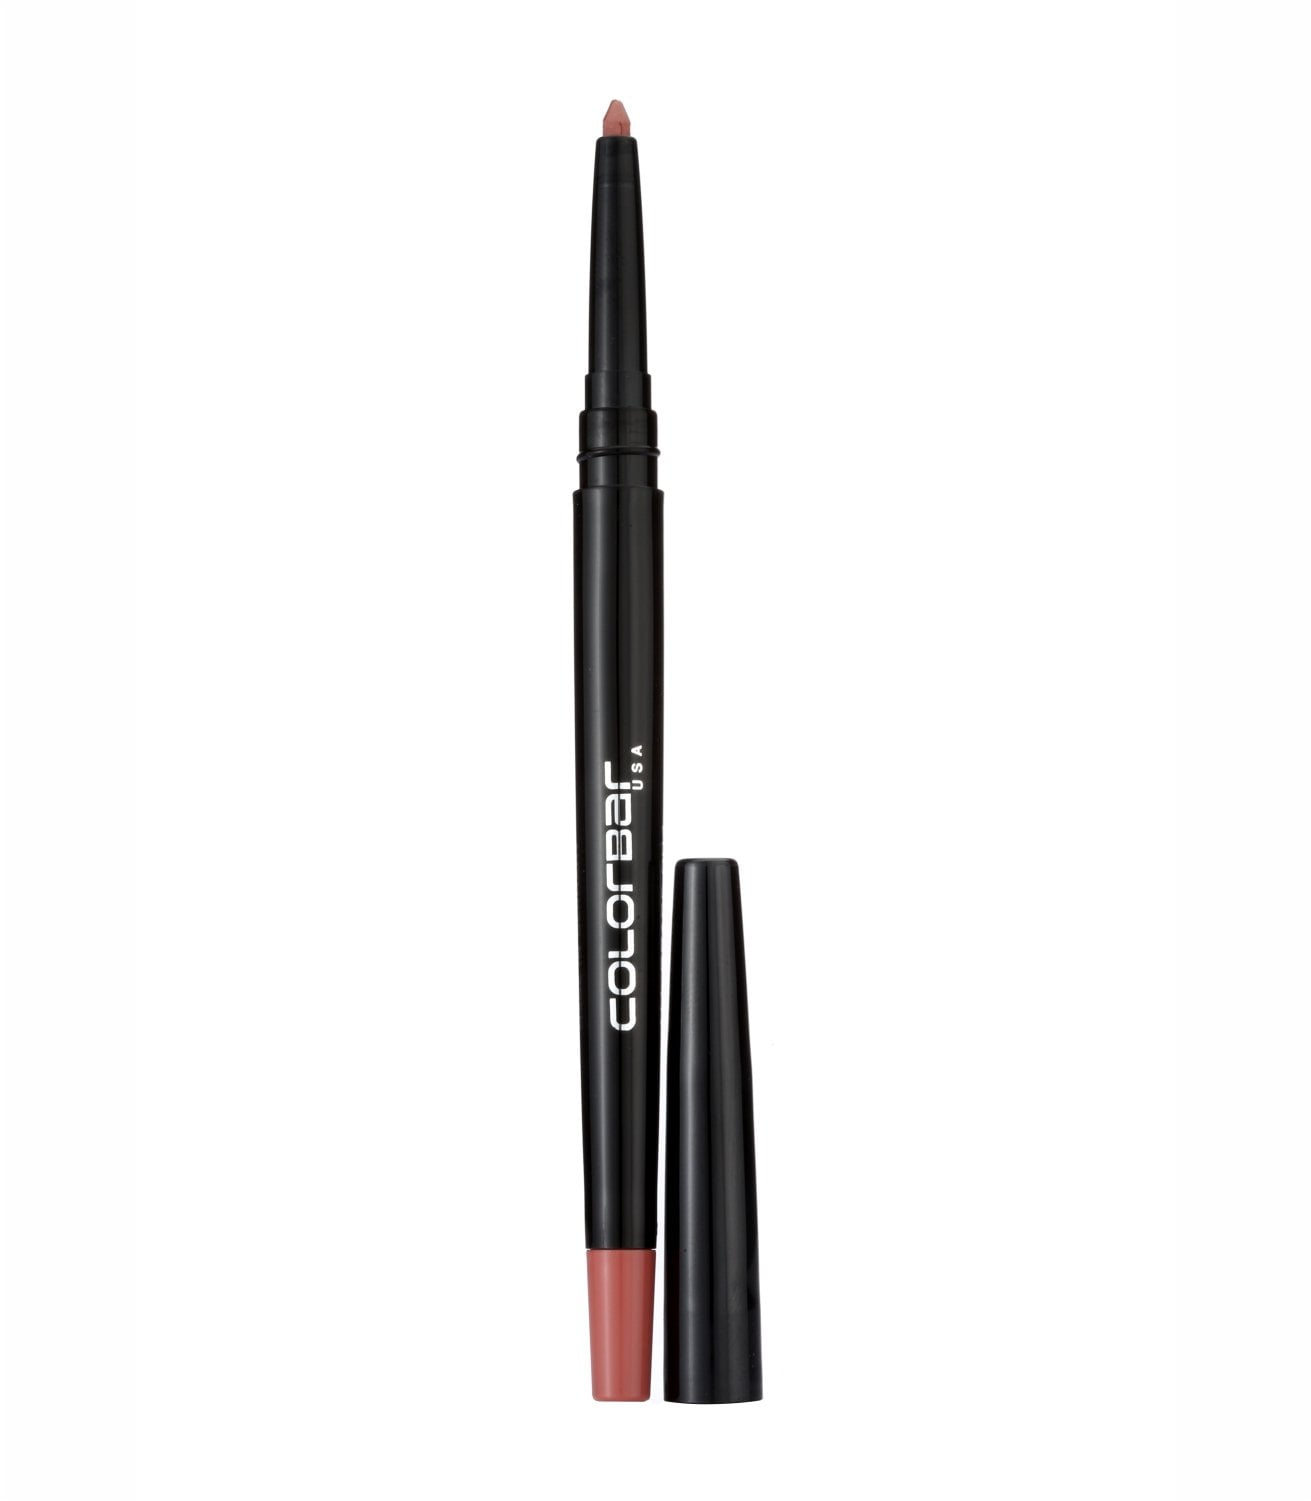 Sharp use how liner ever to lip at home colorbar knee length slimming